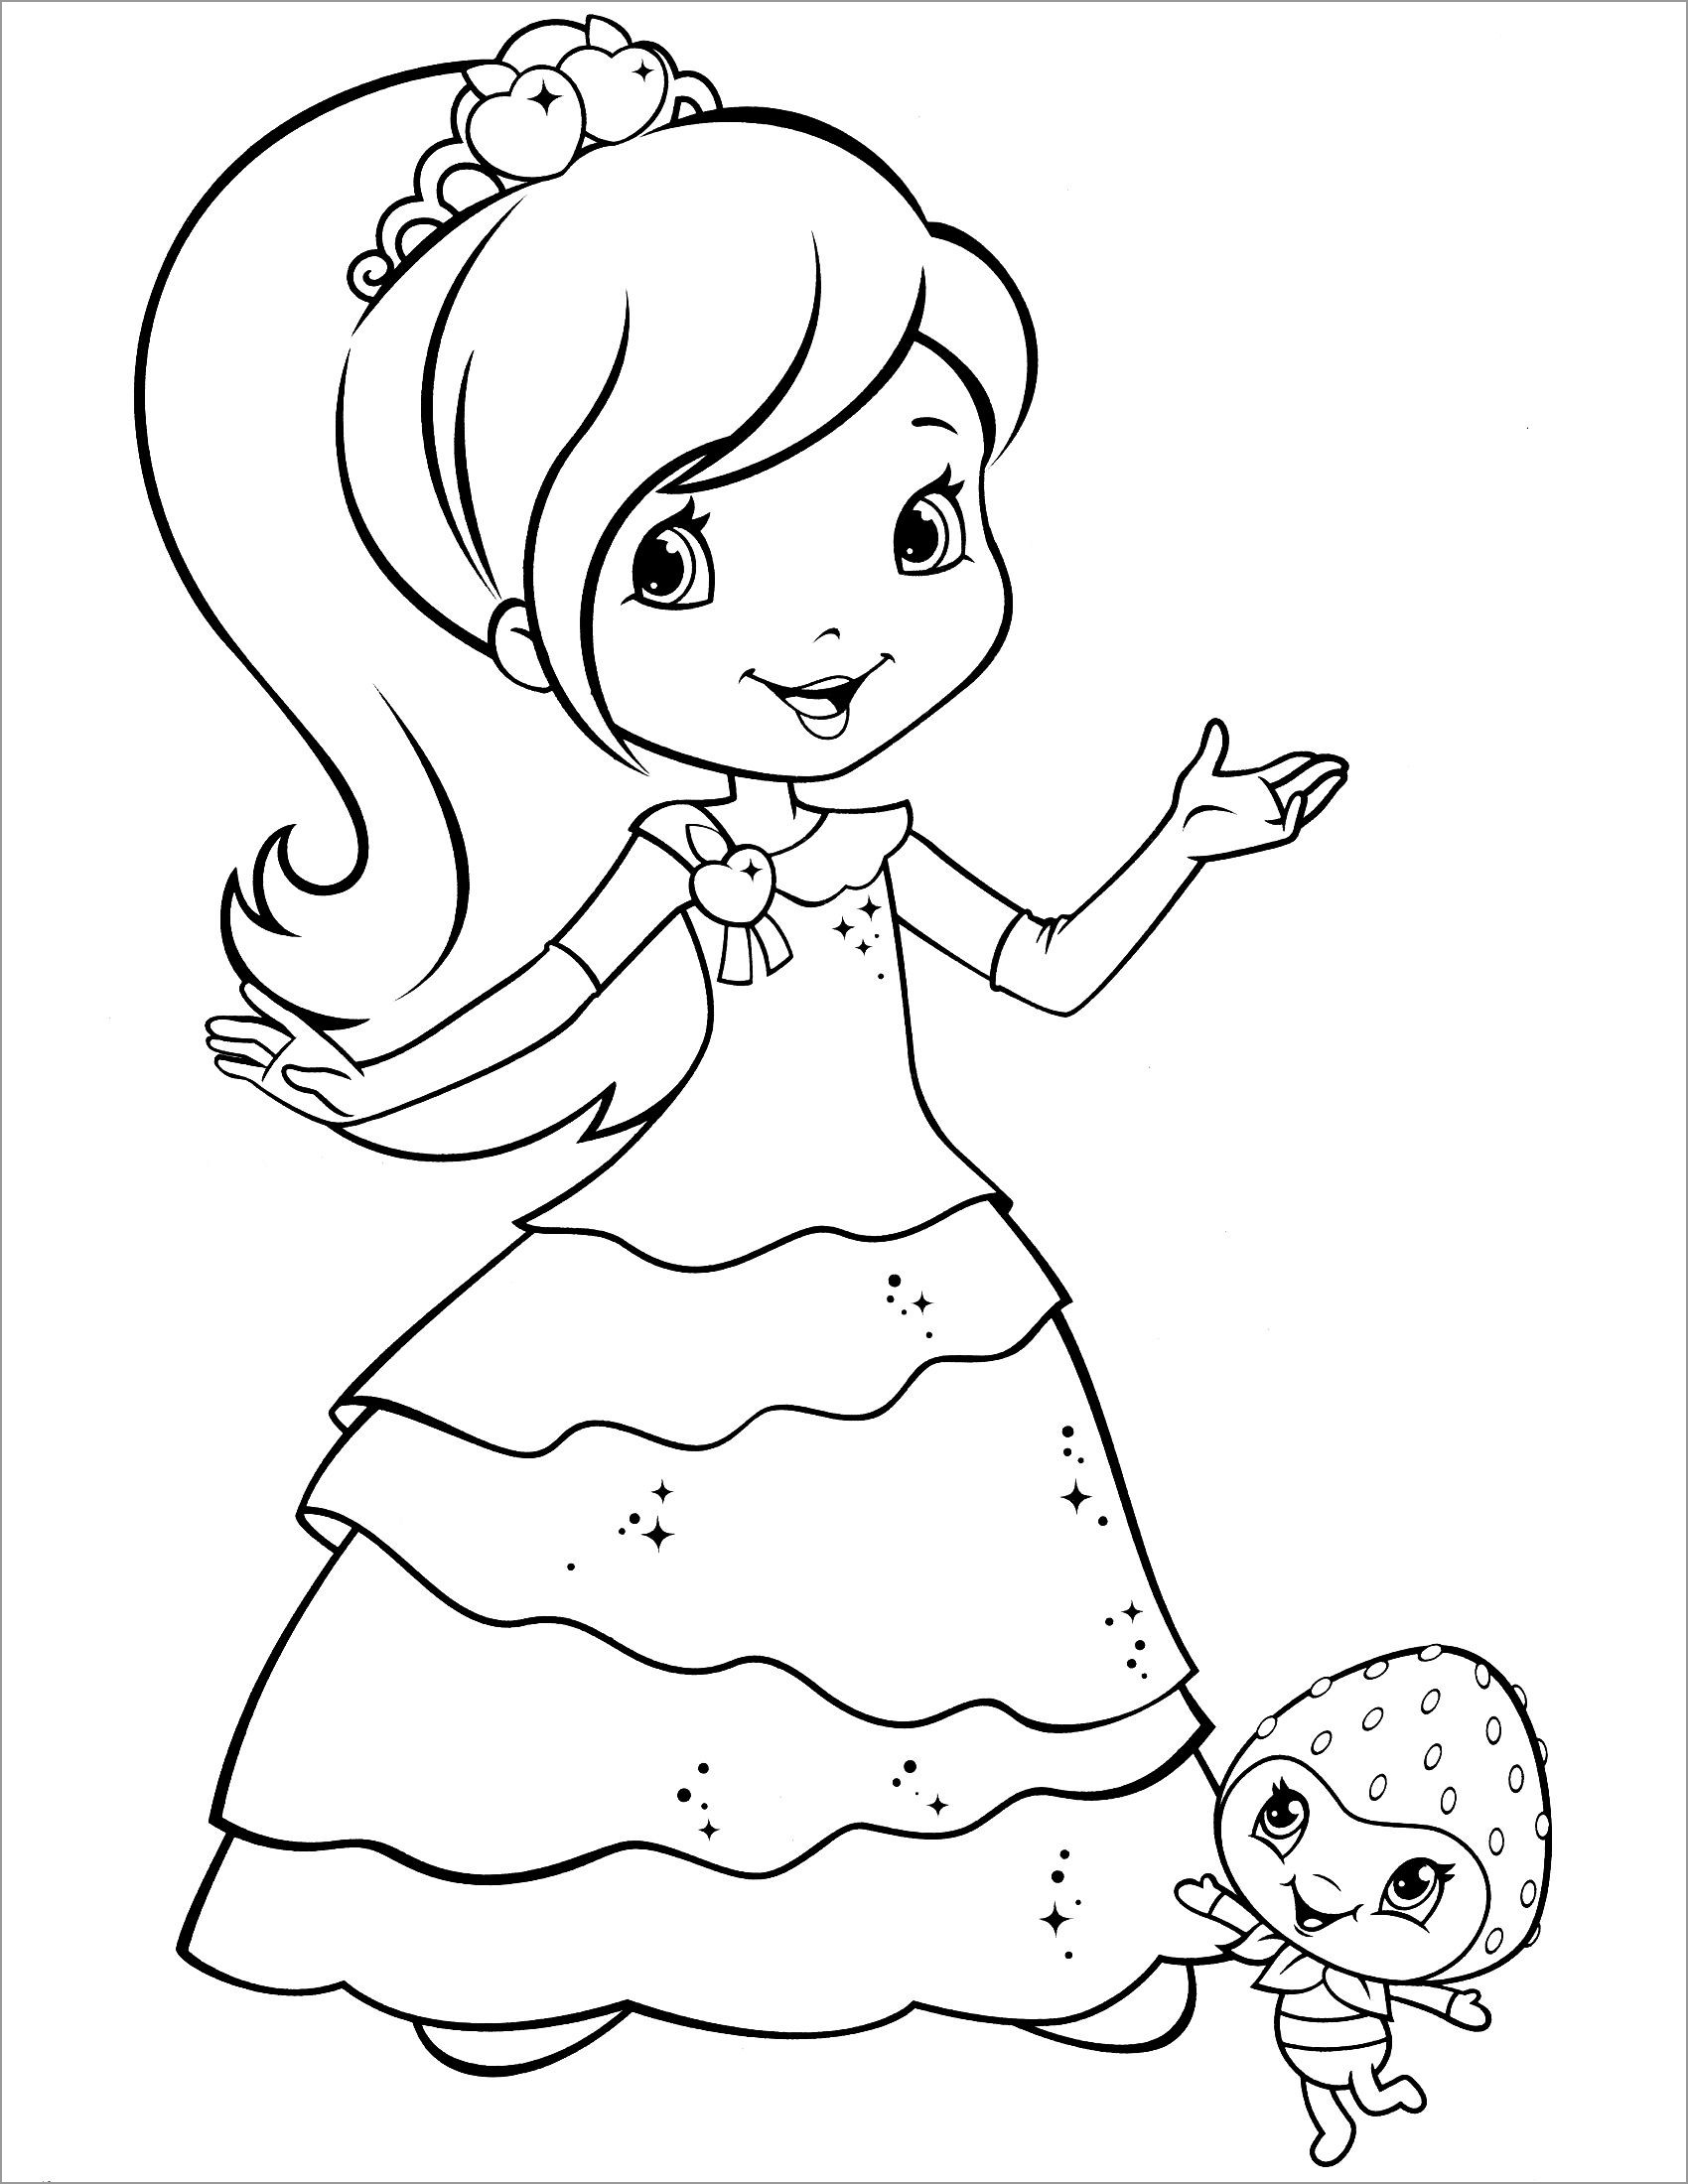 Strawberry Shortcake Coloring Page for Kindergarten